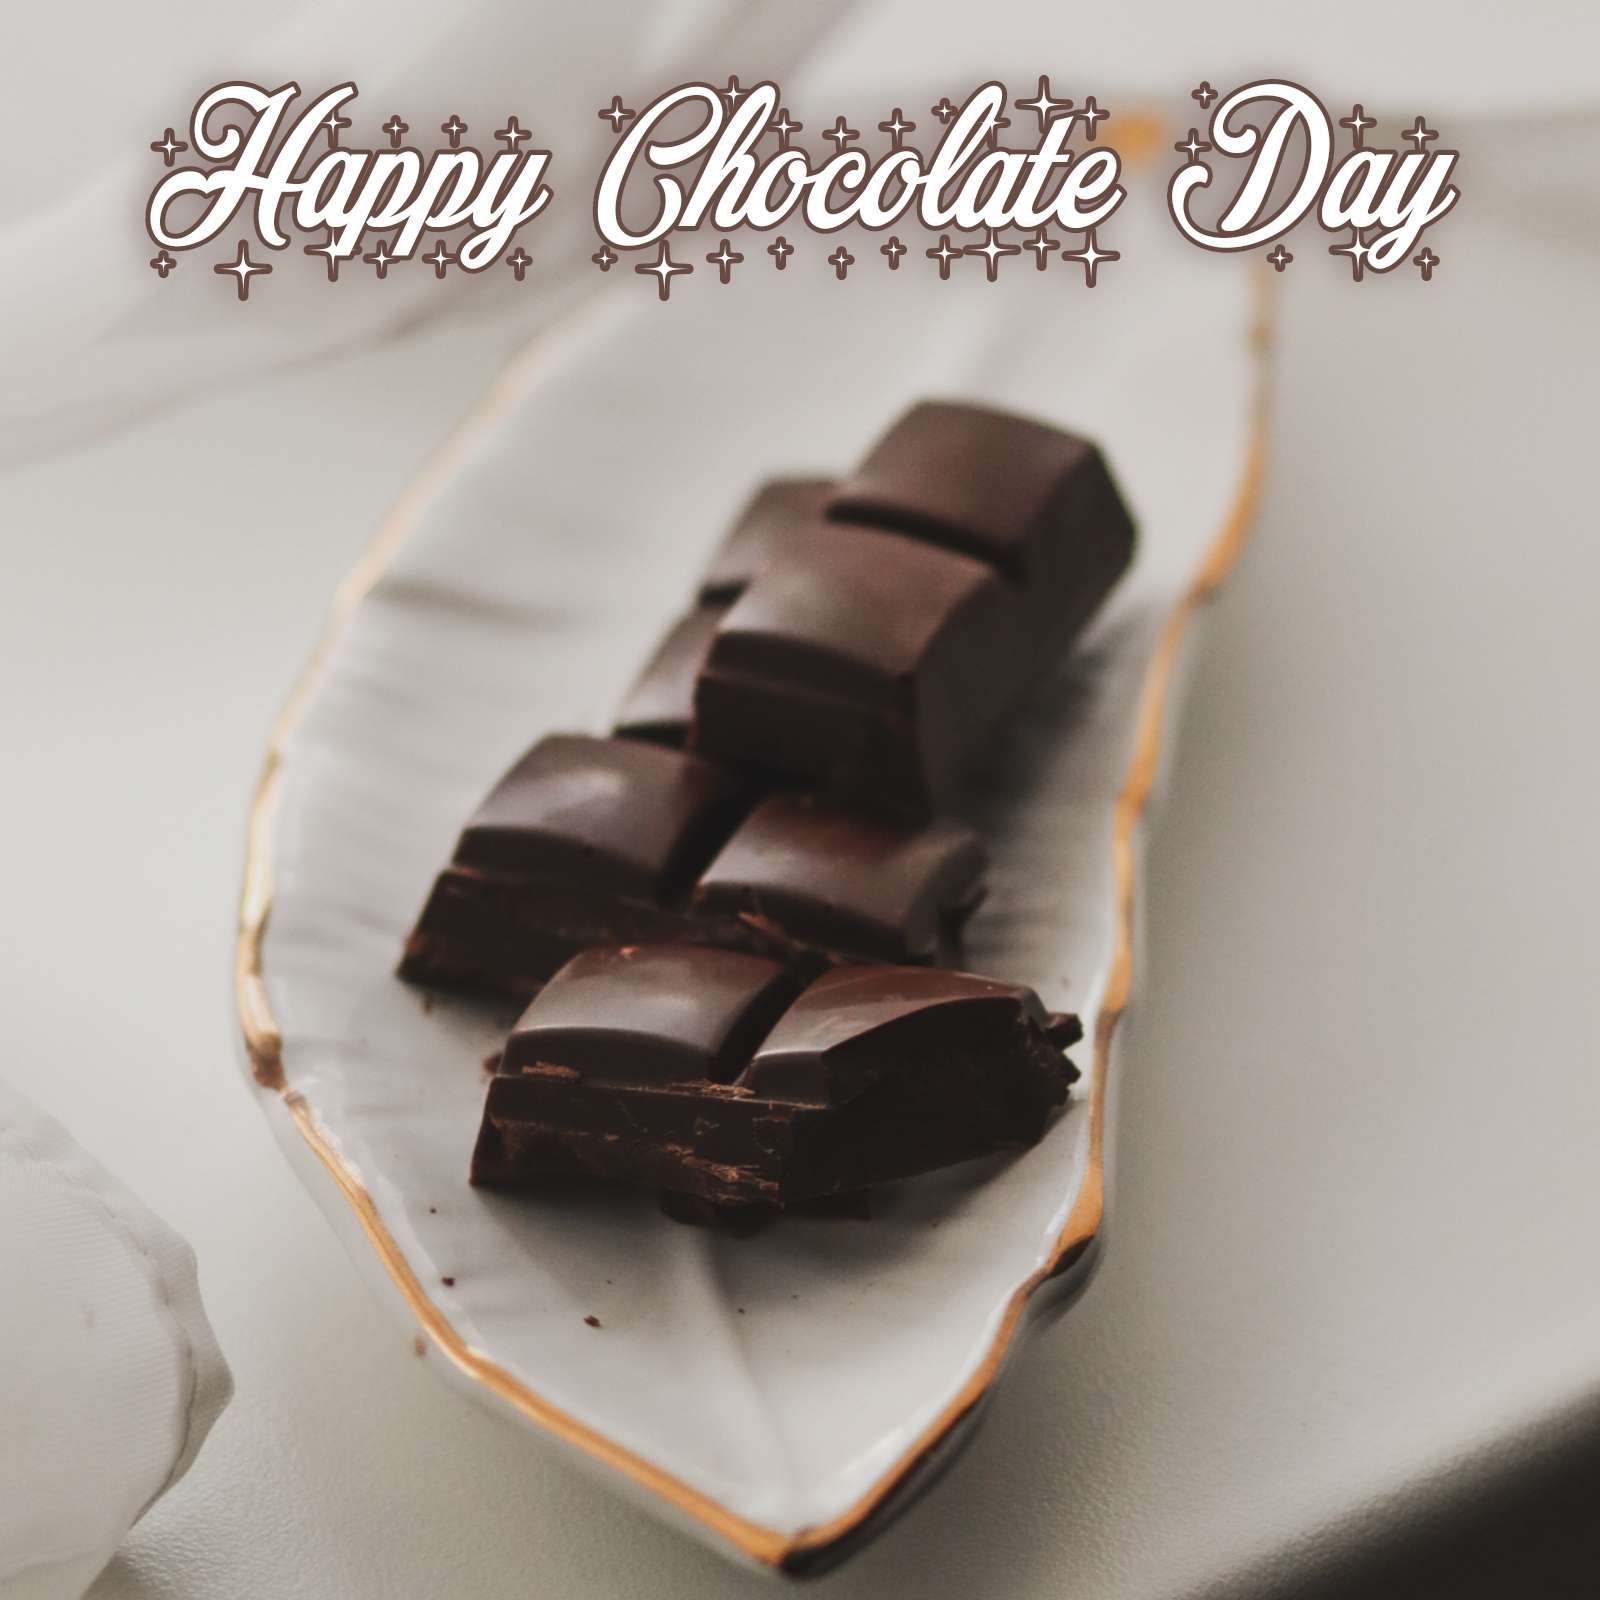 Happy Chocolate Day 2022 Images Download